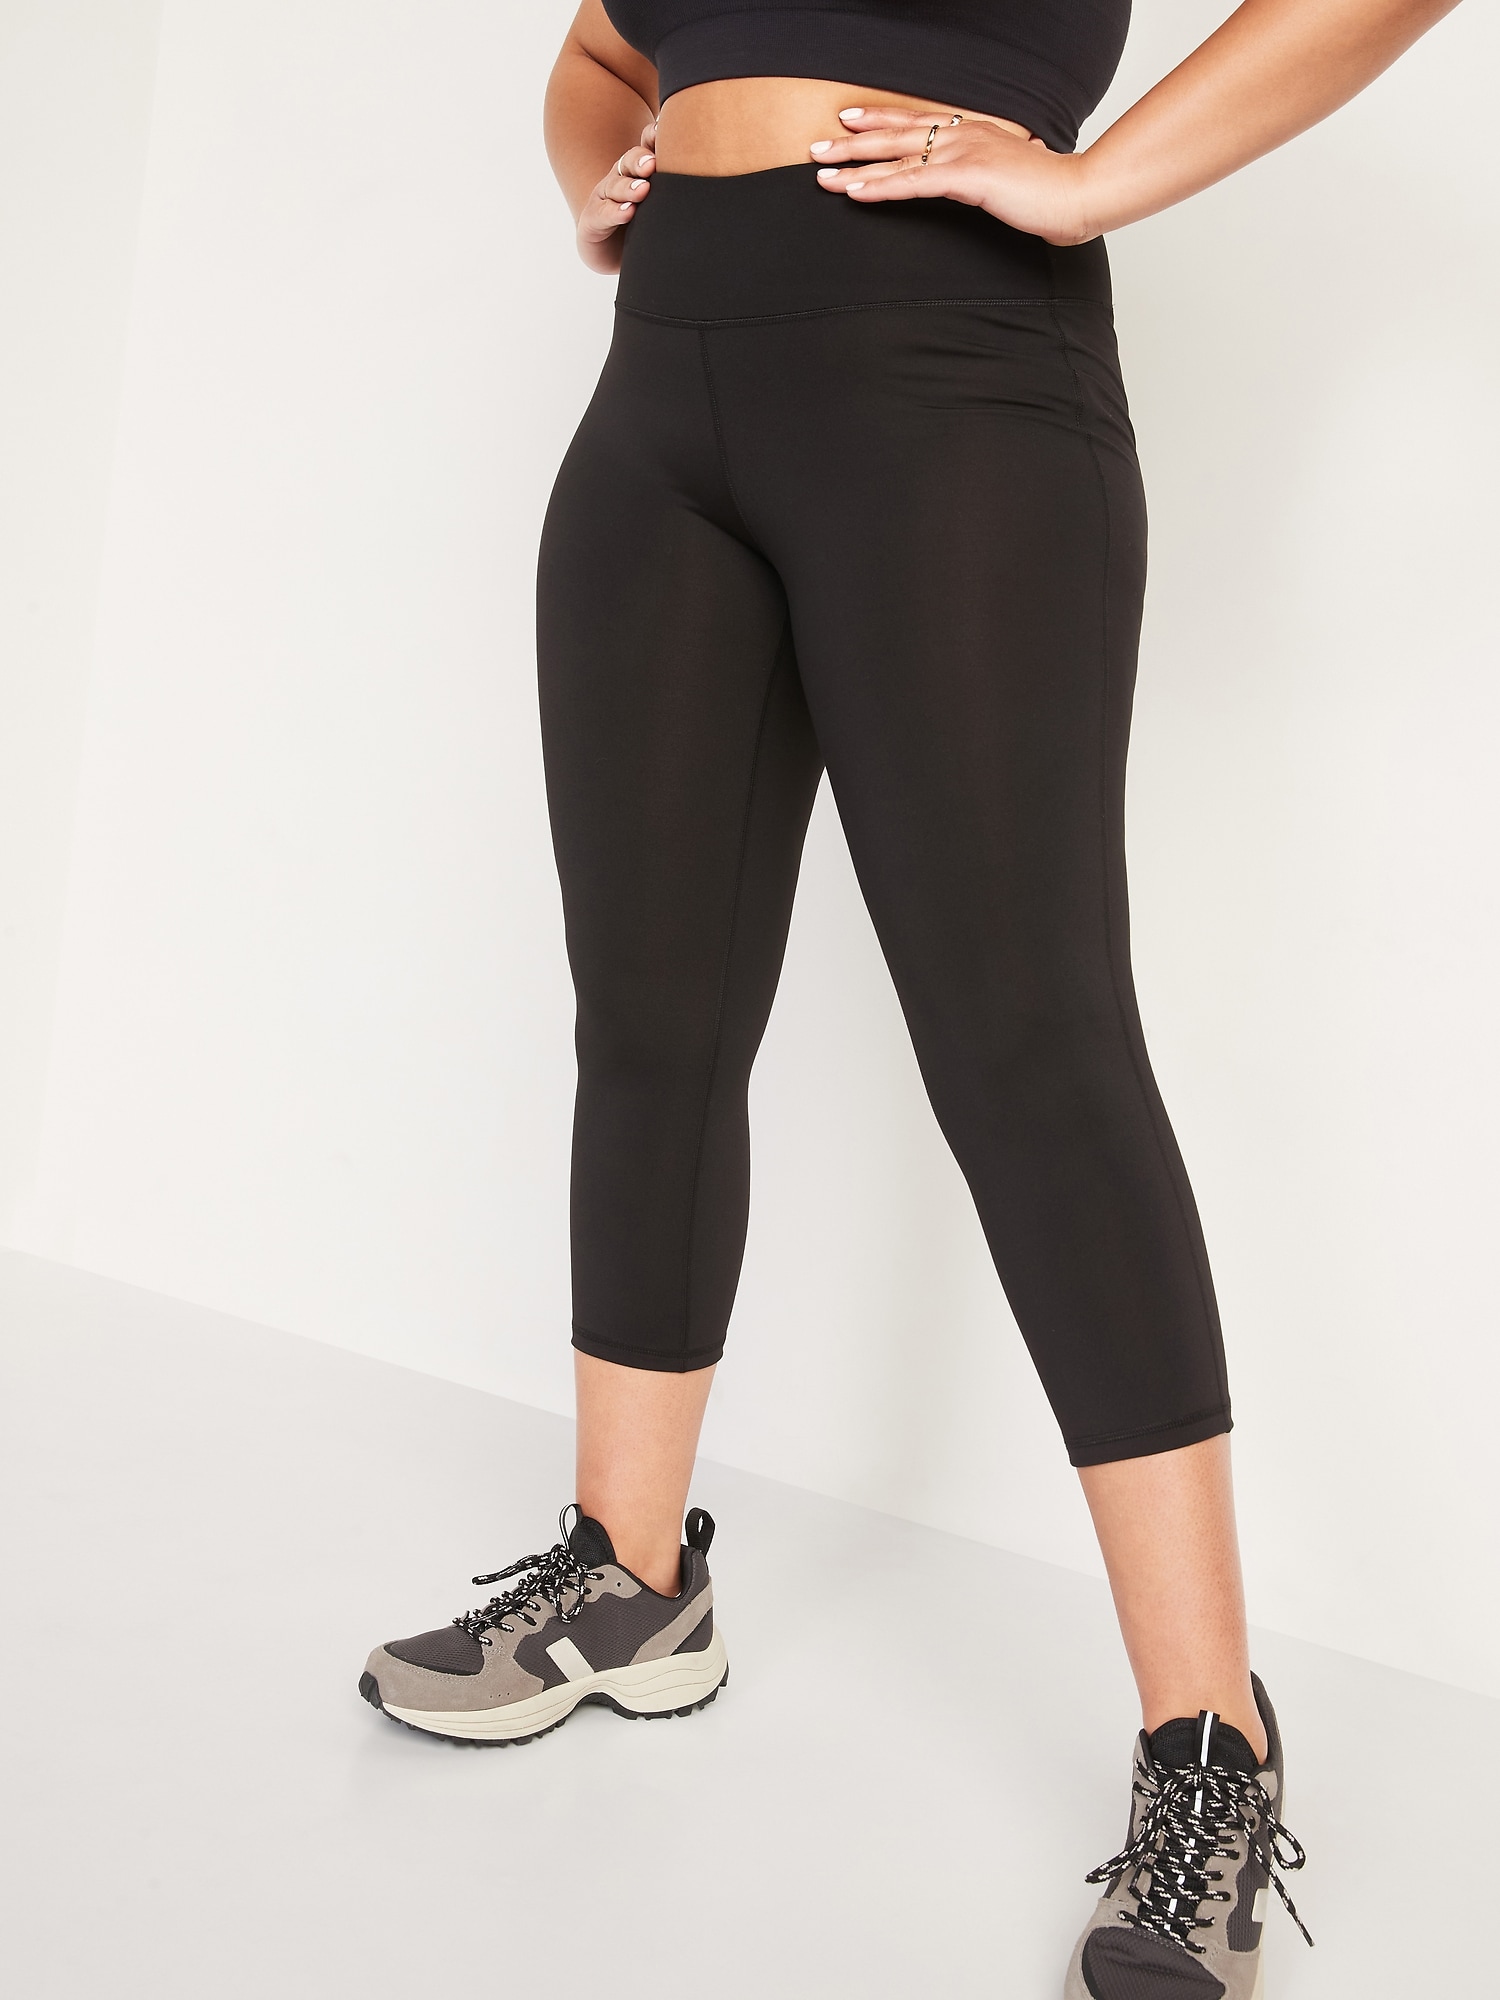 Stylish Cropped Leggings in Various Colors